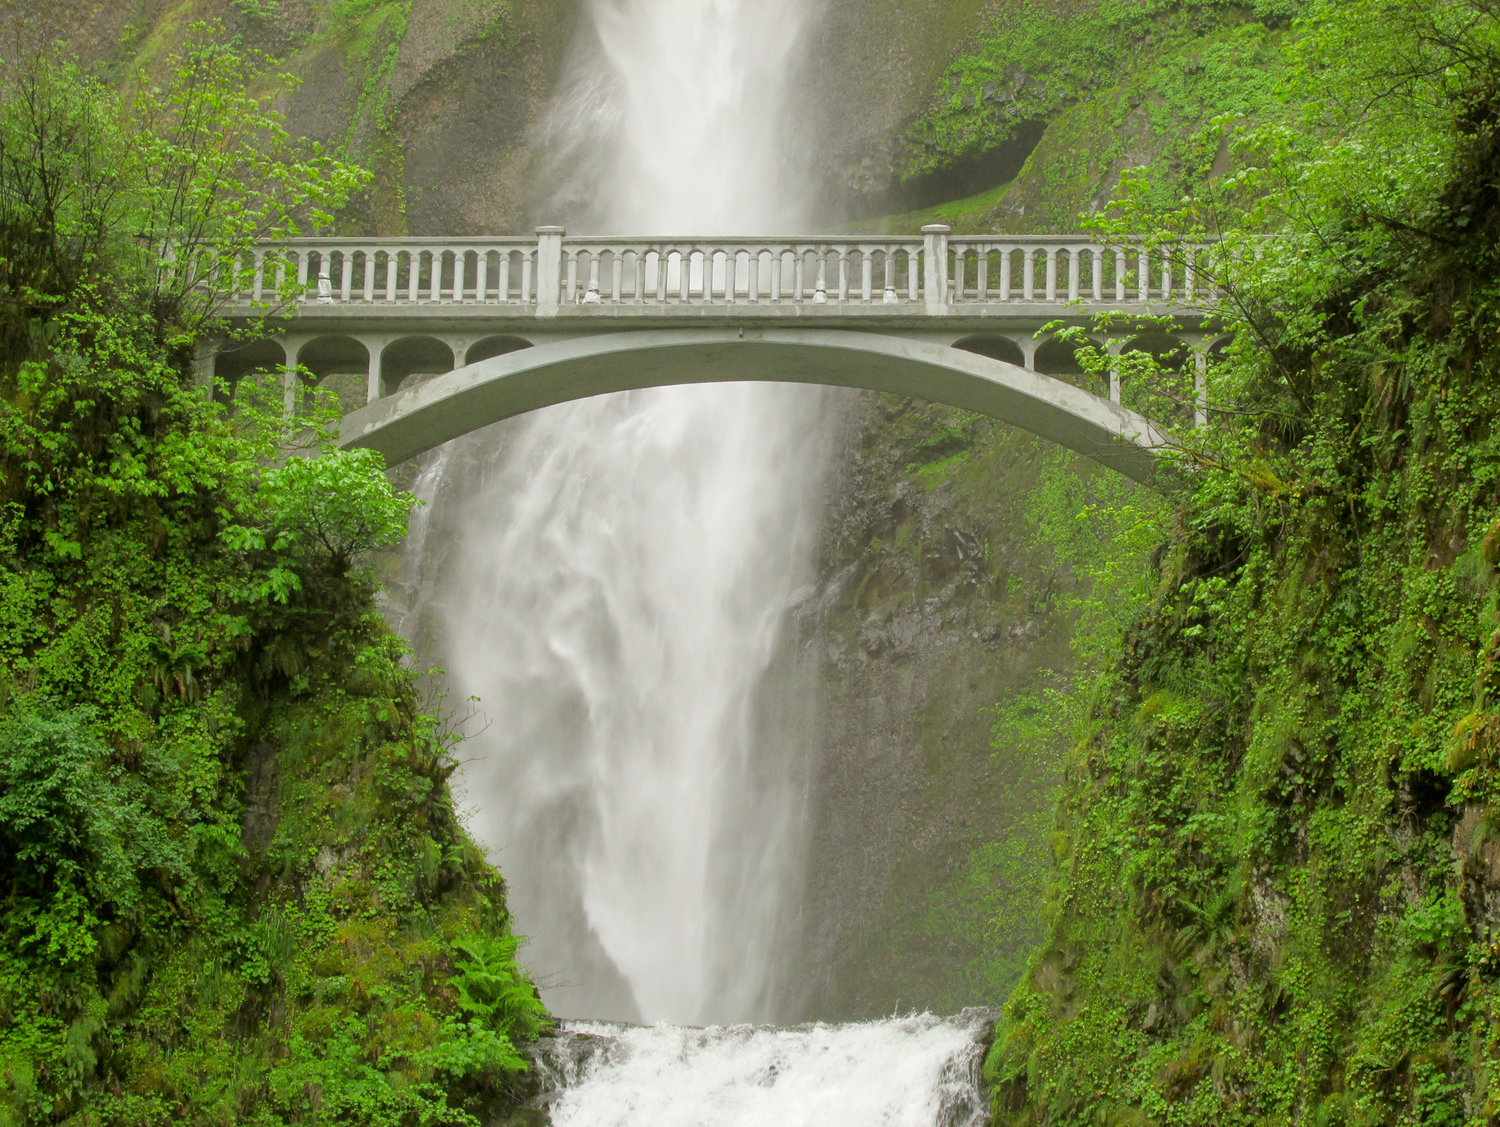 WITH THE reopening of the Benson Bridge, visitors can once again traverse the popular Multnomah Falls trail to its upper falls viewpoint. Photo courtesy of Catworks Construction